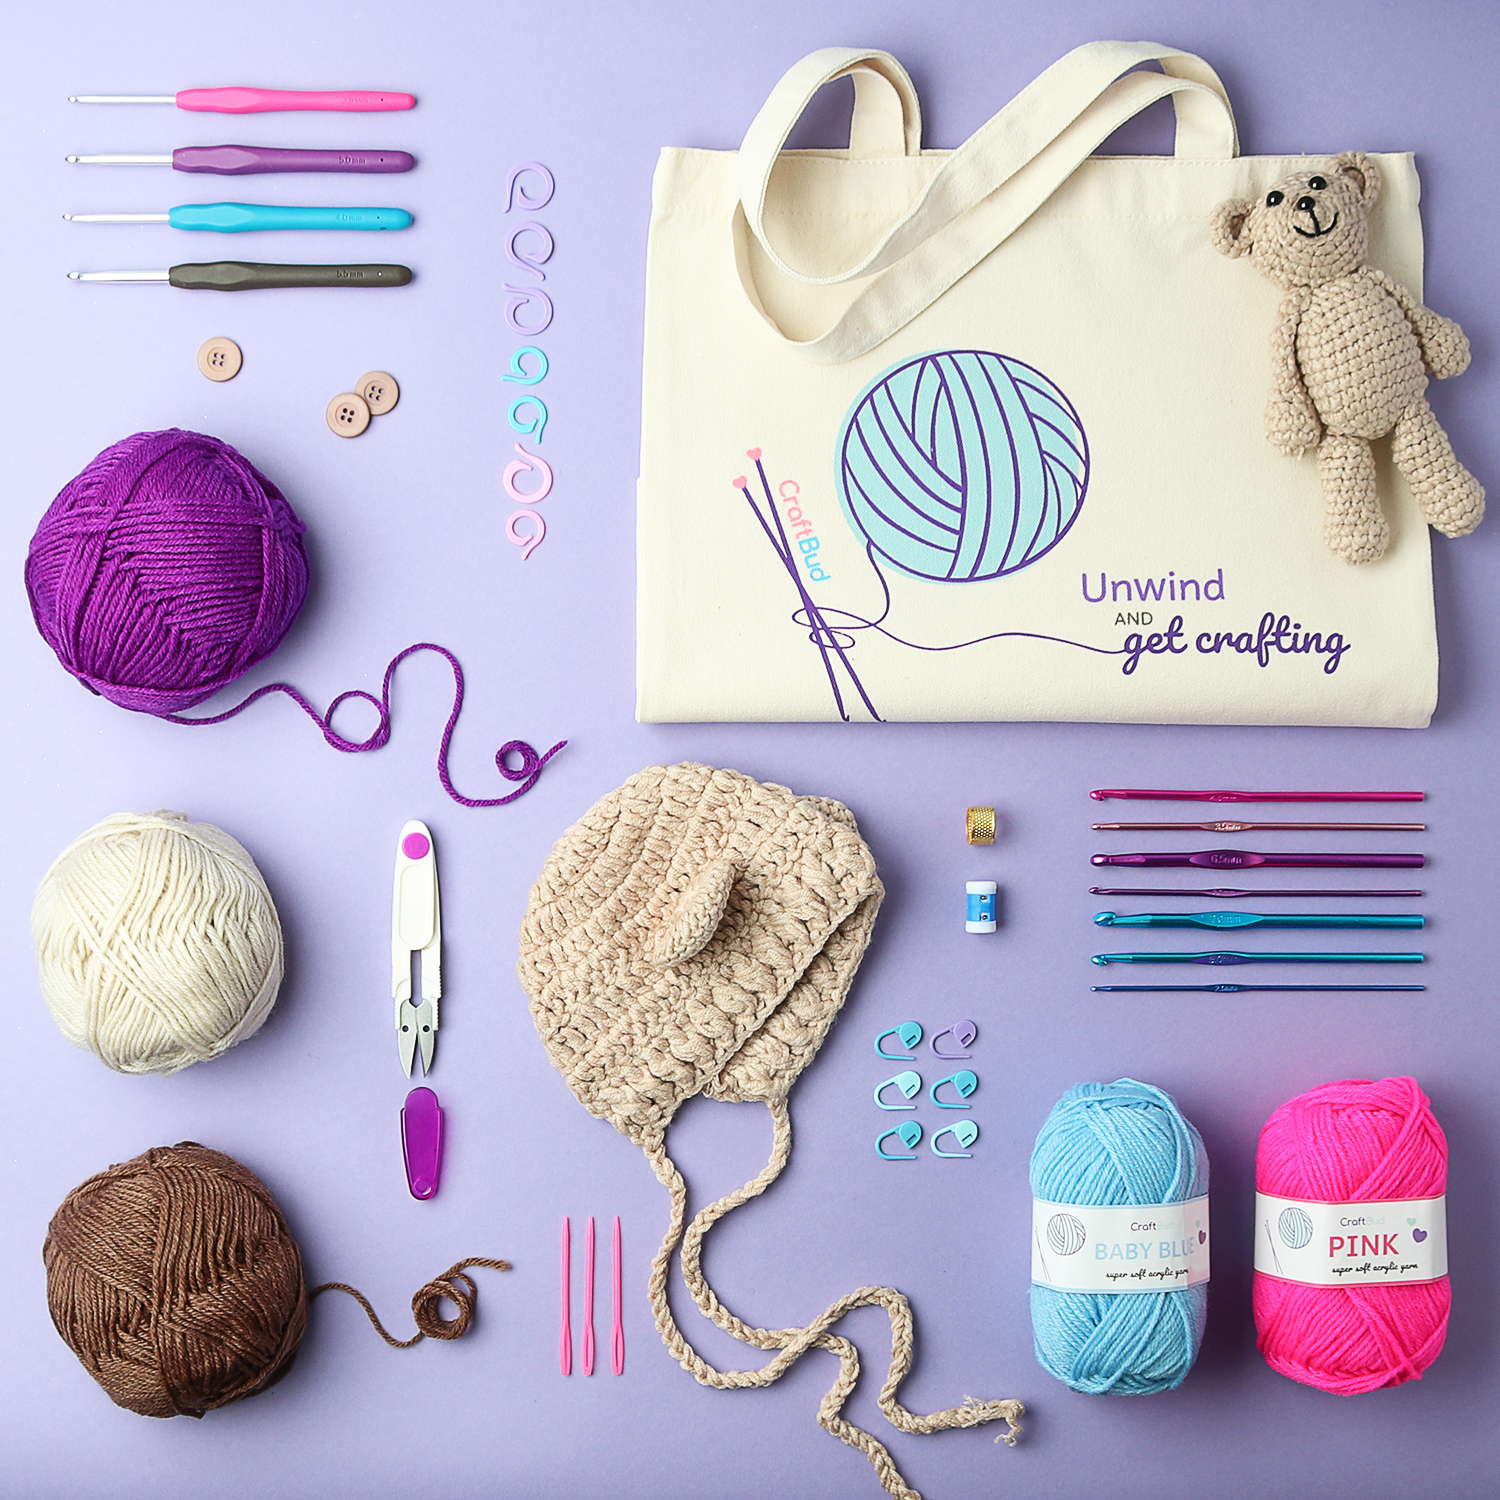 Craftbud 73 Piece Beginners Crochet Kit with Crochet Hooks Yarn Set, Premium Bundle Includes Yarn Balls, Needles, Accessories Kit, Canvas Tote Bag for Travel - image 5 of 9